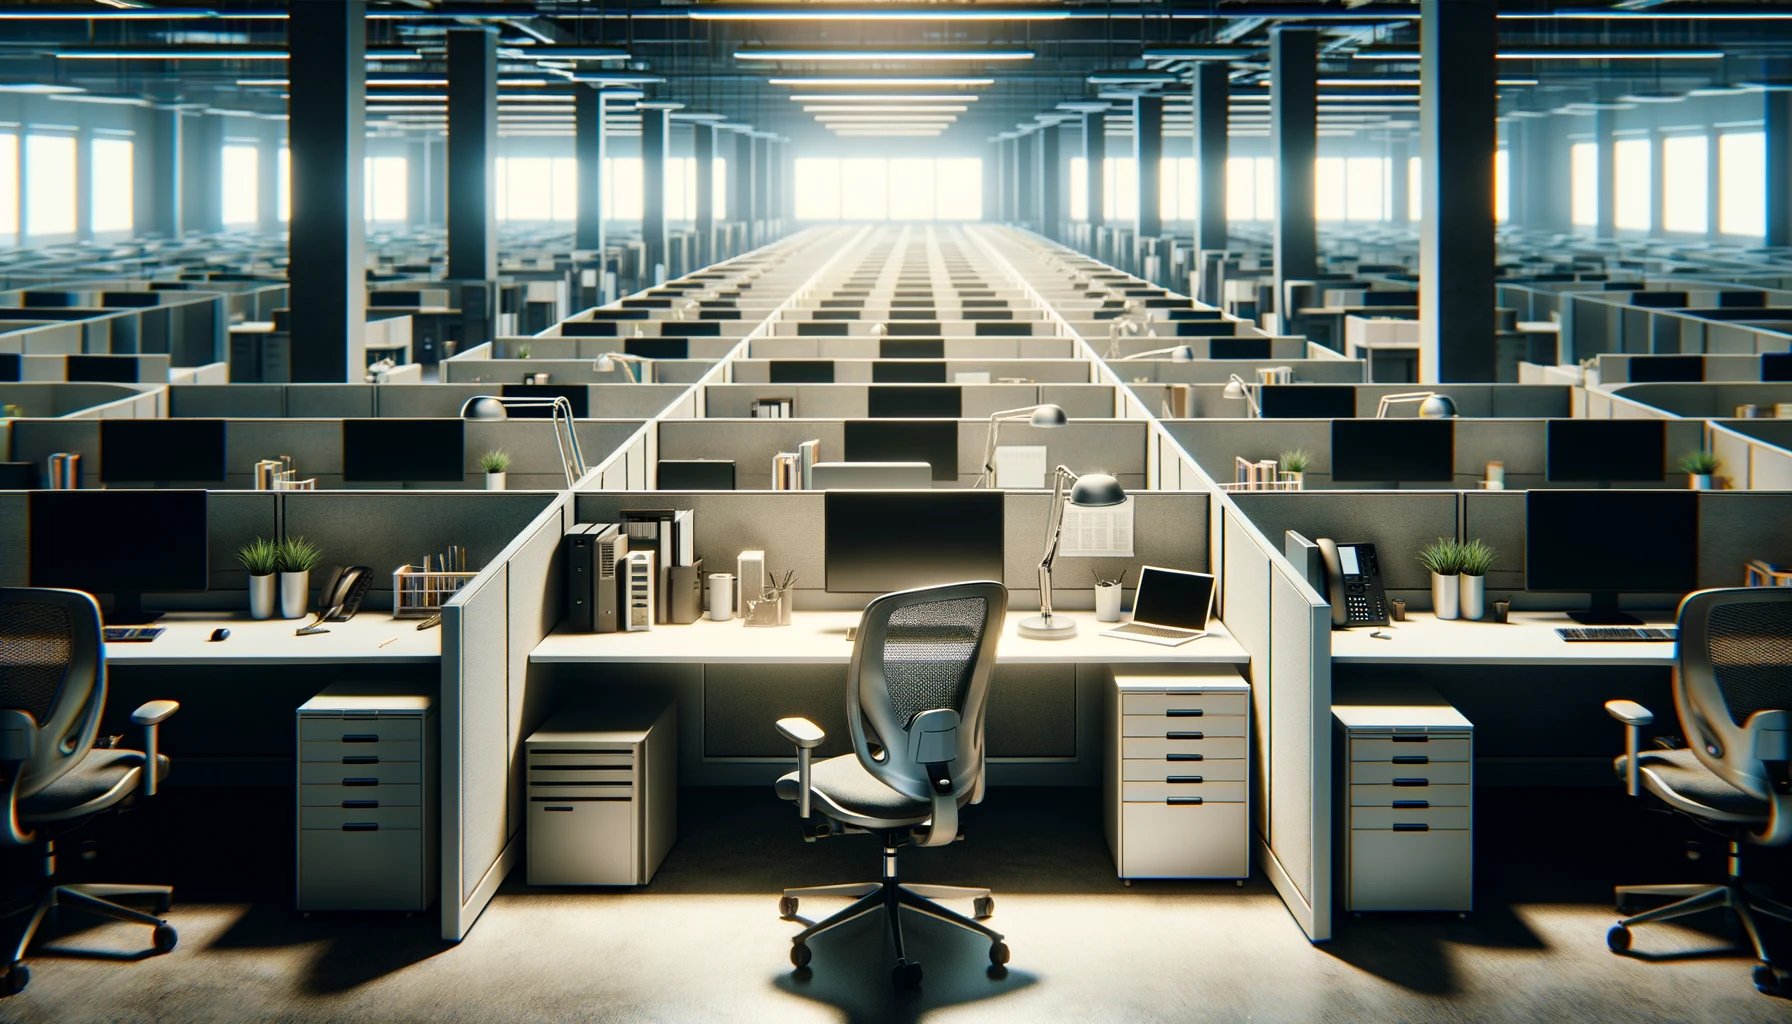 DALL·E 2024-02-29 13.19.46 - An office space filled with empty cubicles, highlighting the quiet and deserted atmosphere of a workplace with return to office mandates. The scene ca